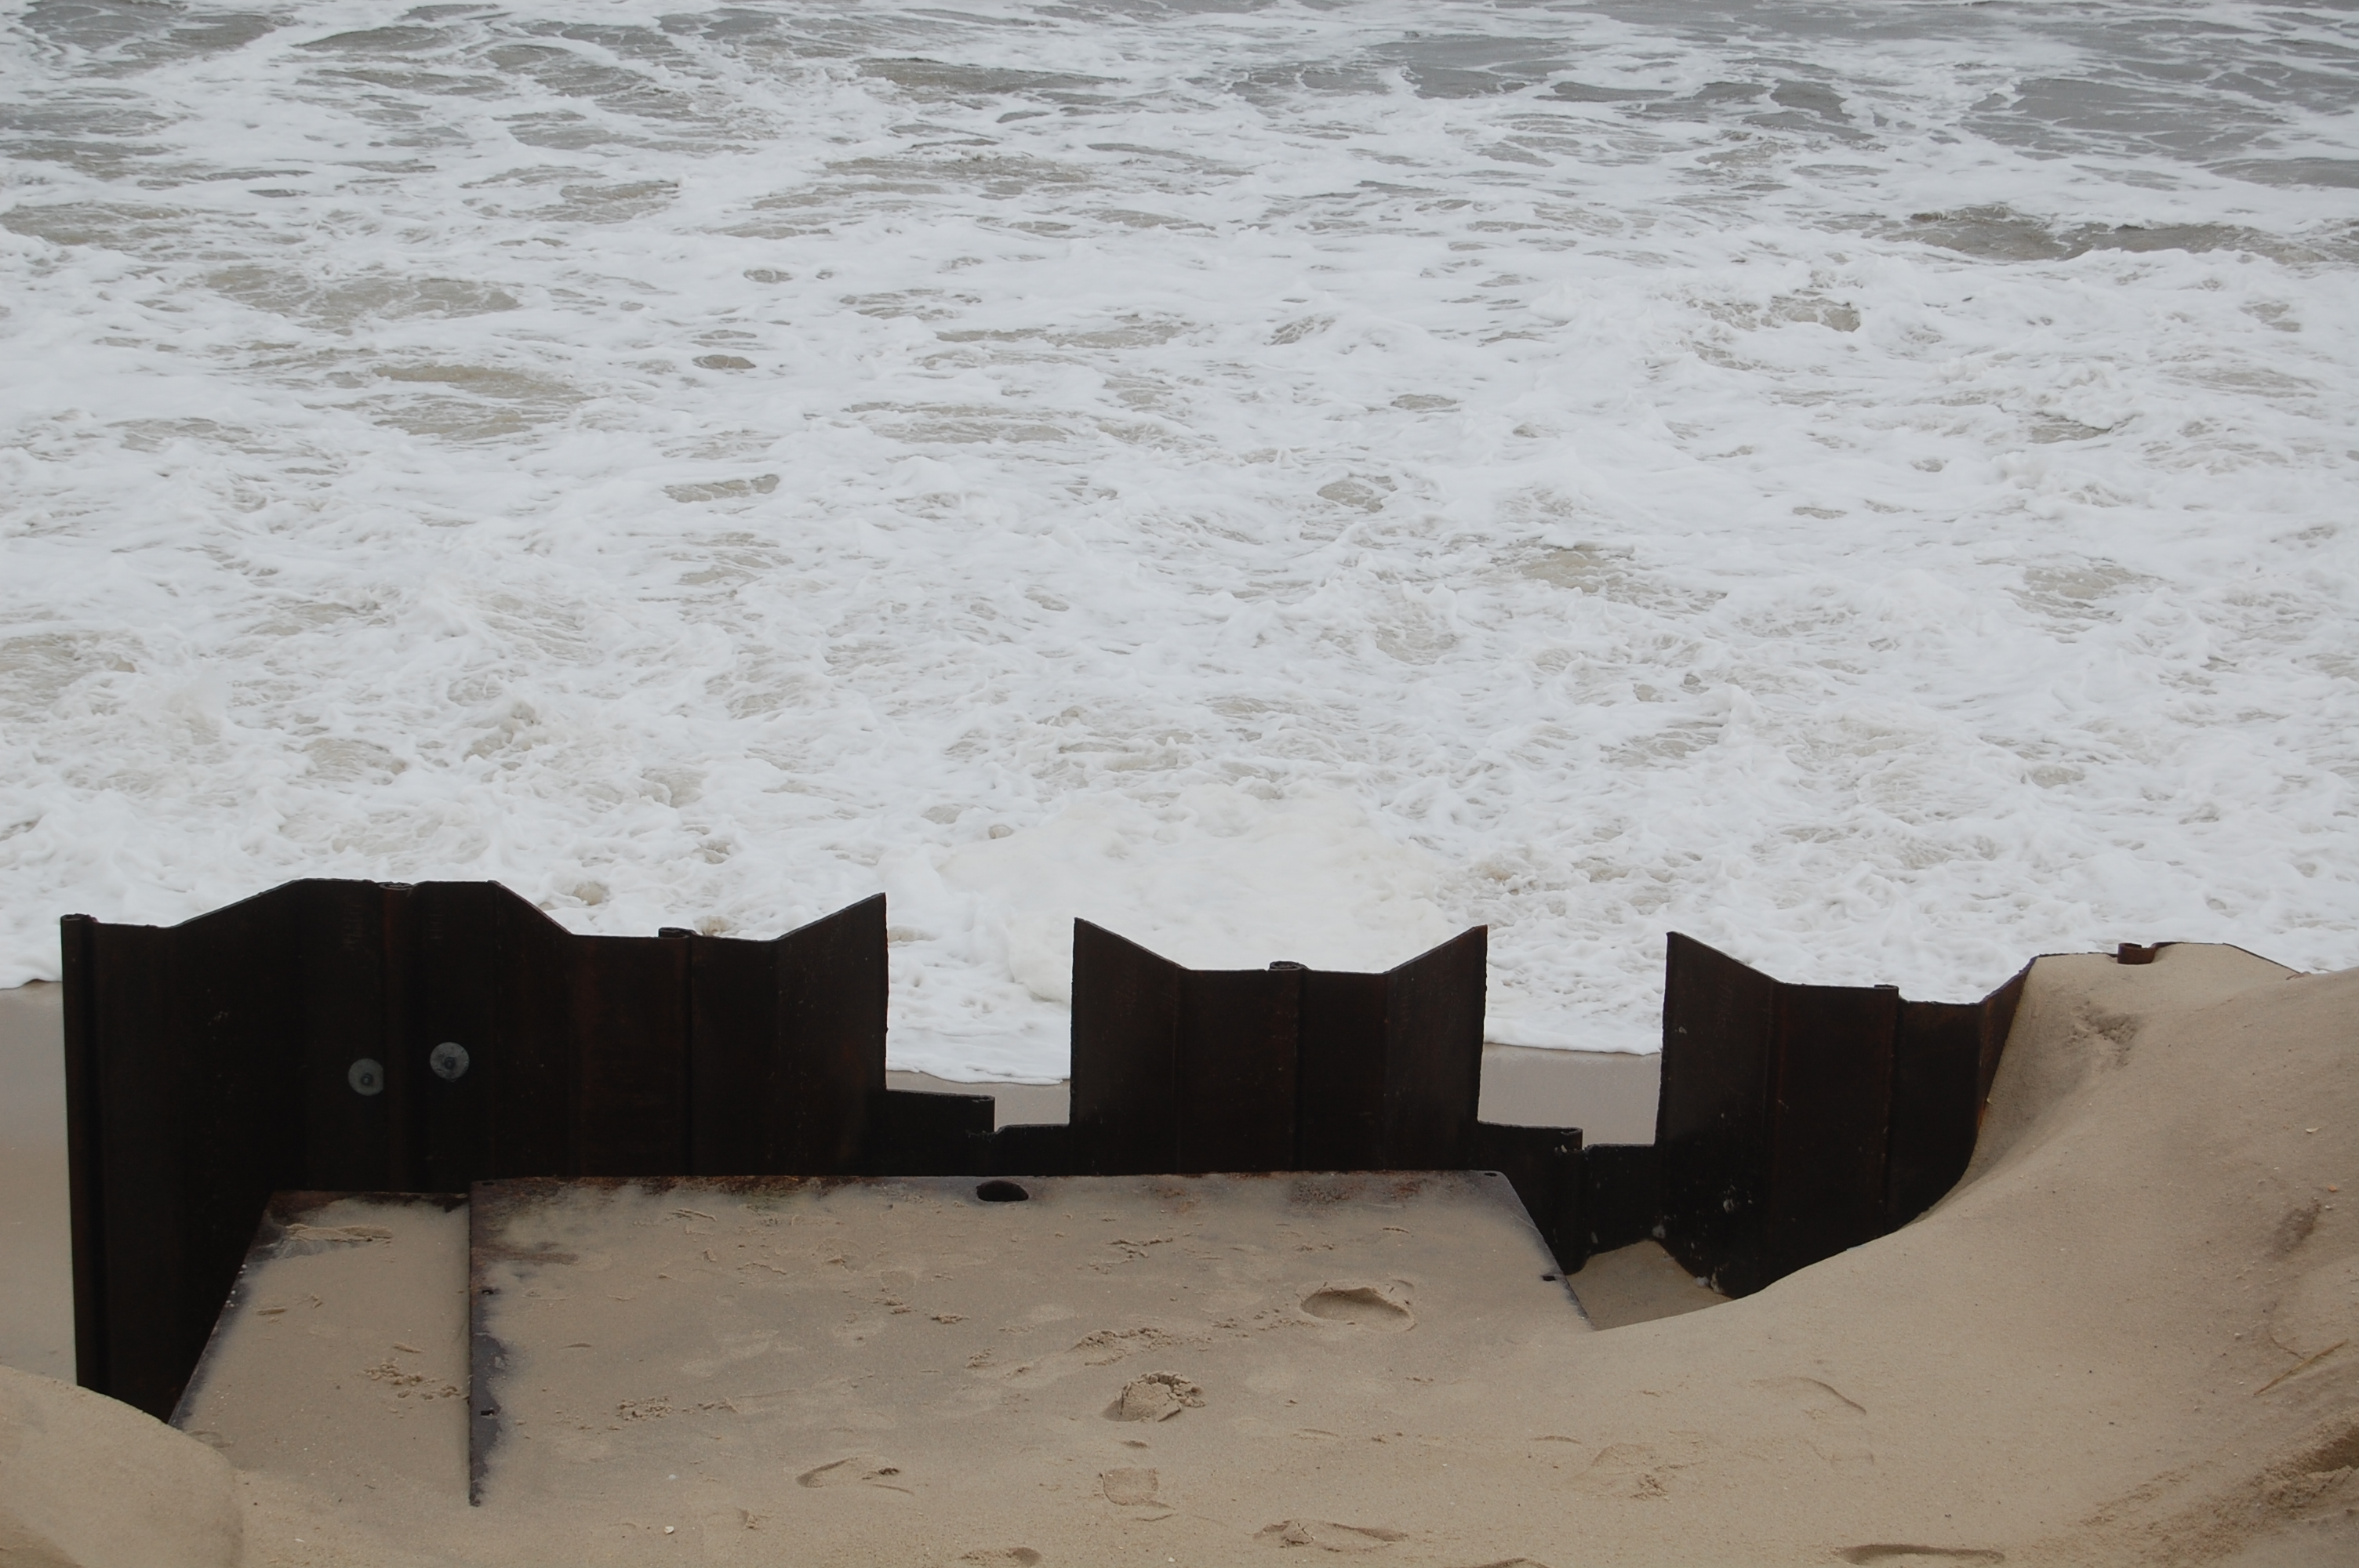 A steel sea wall revetment in Brick, N.J. holds back waves from a nor'easter, Dec. 9, 2014. (Photo: Daniel Nee)